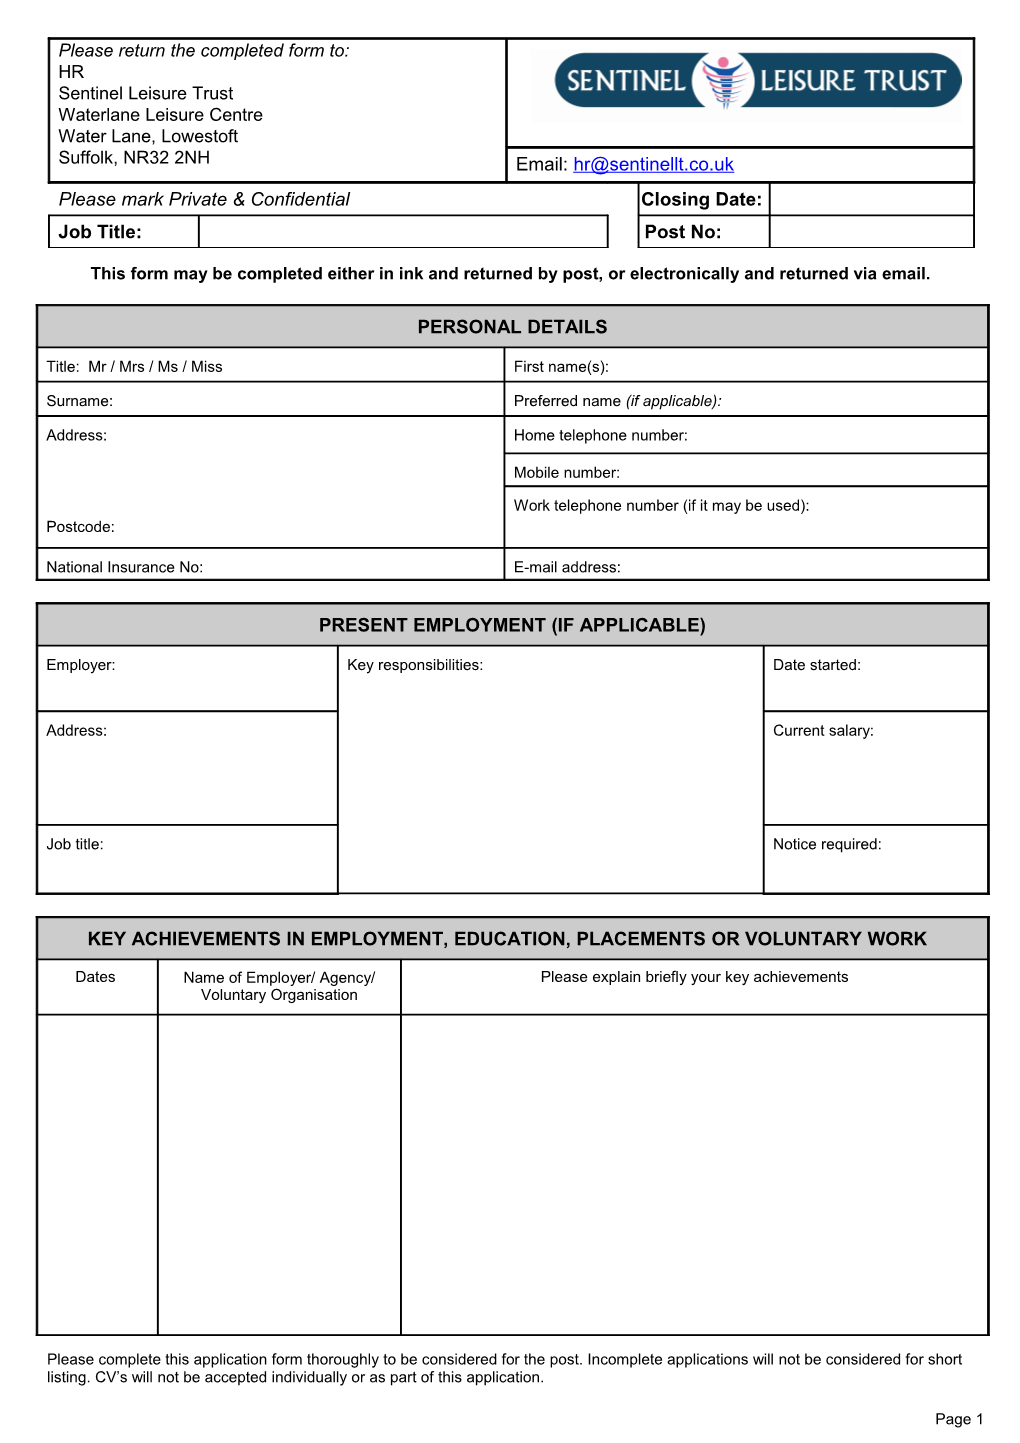 This Form May Be Completed Either in Inkand Returned by Post, Or Electronically and Returned